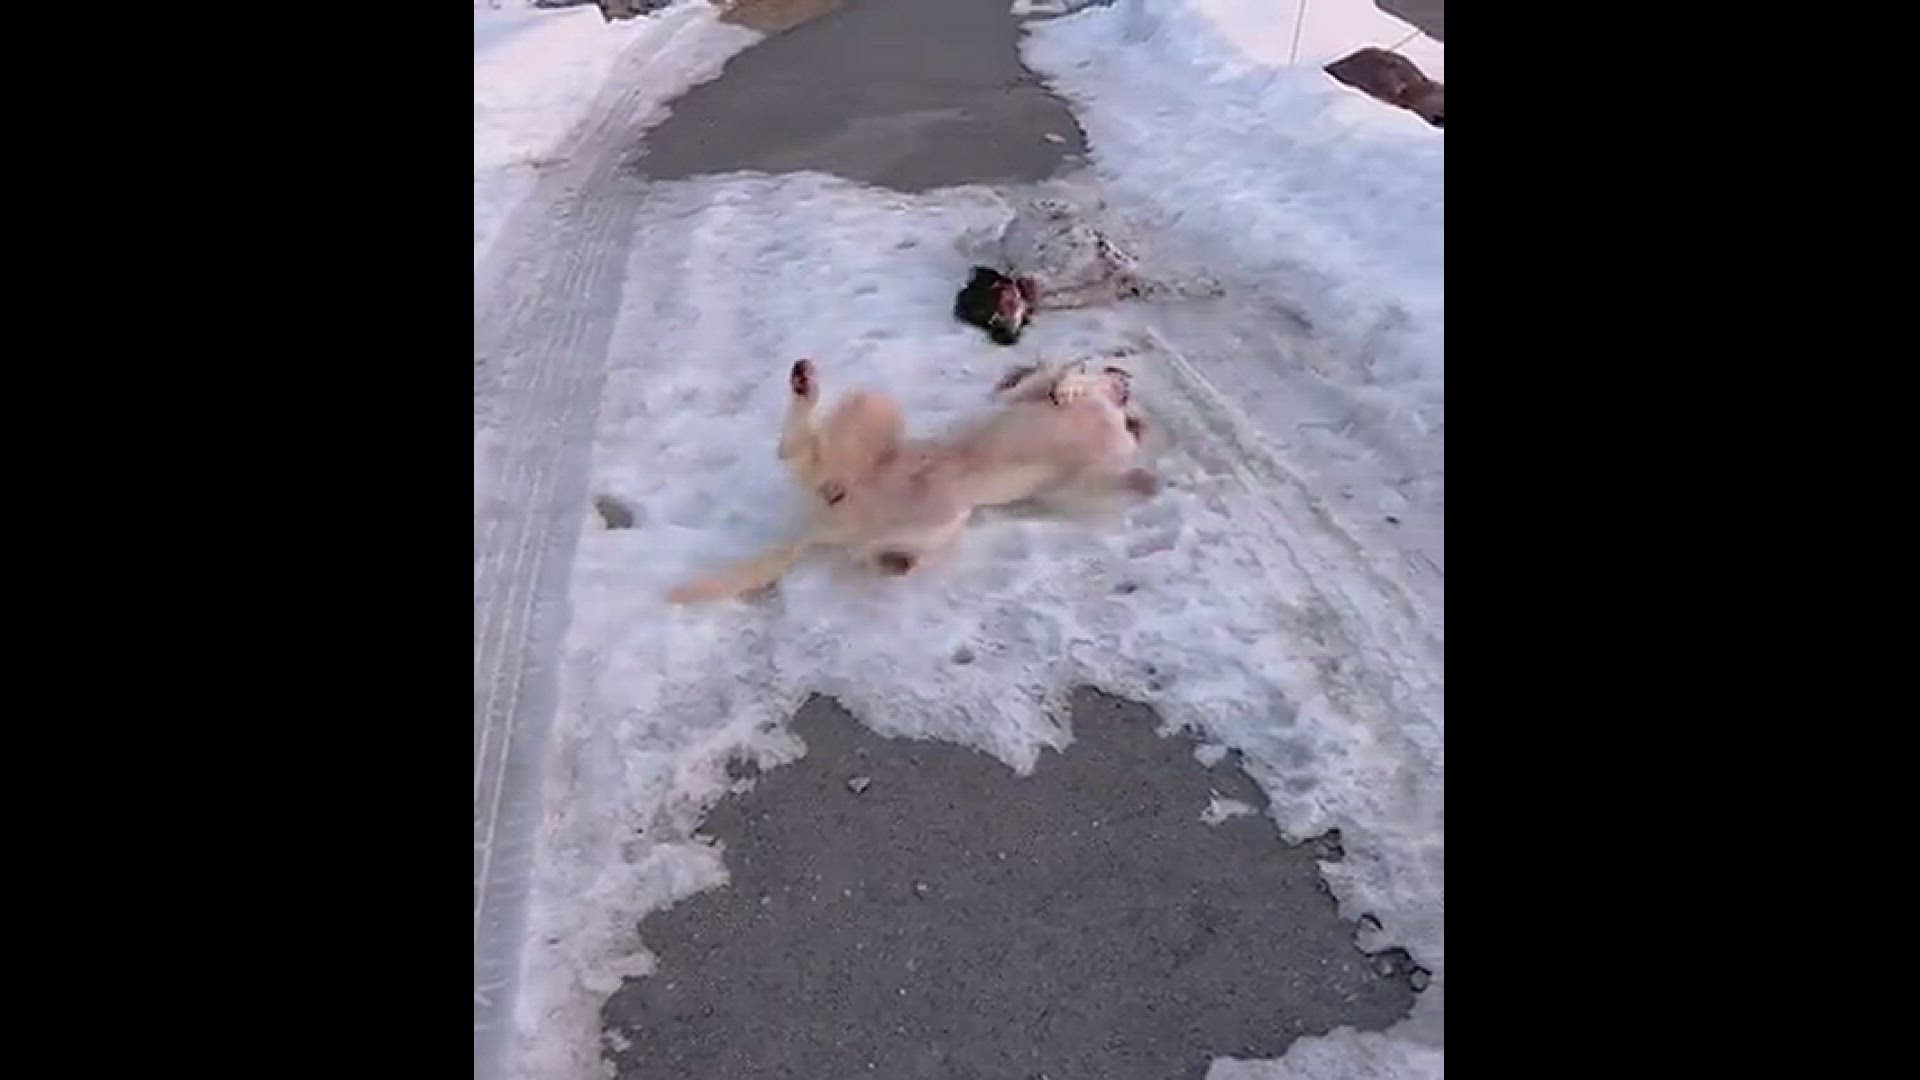 Krispie and Annie, our English Setters, take a morning roll down the slippery driveway.
Credit: Susan Barnard